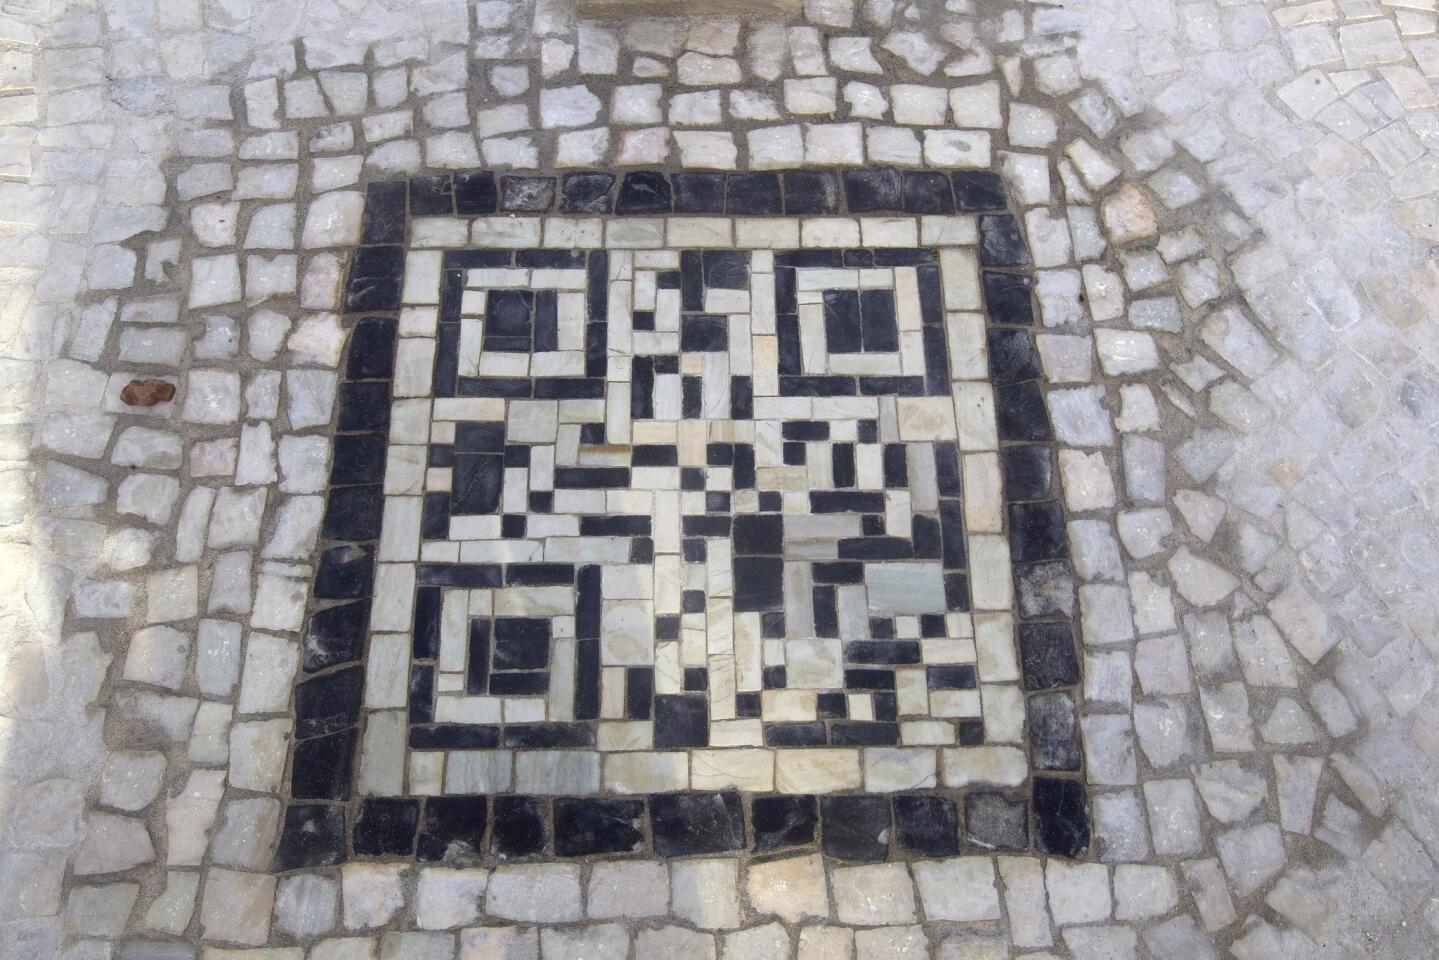 A QR code made from stone tiles at Arpoador rock.